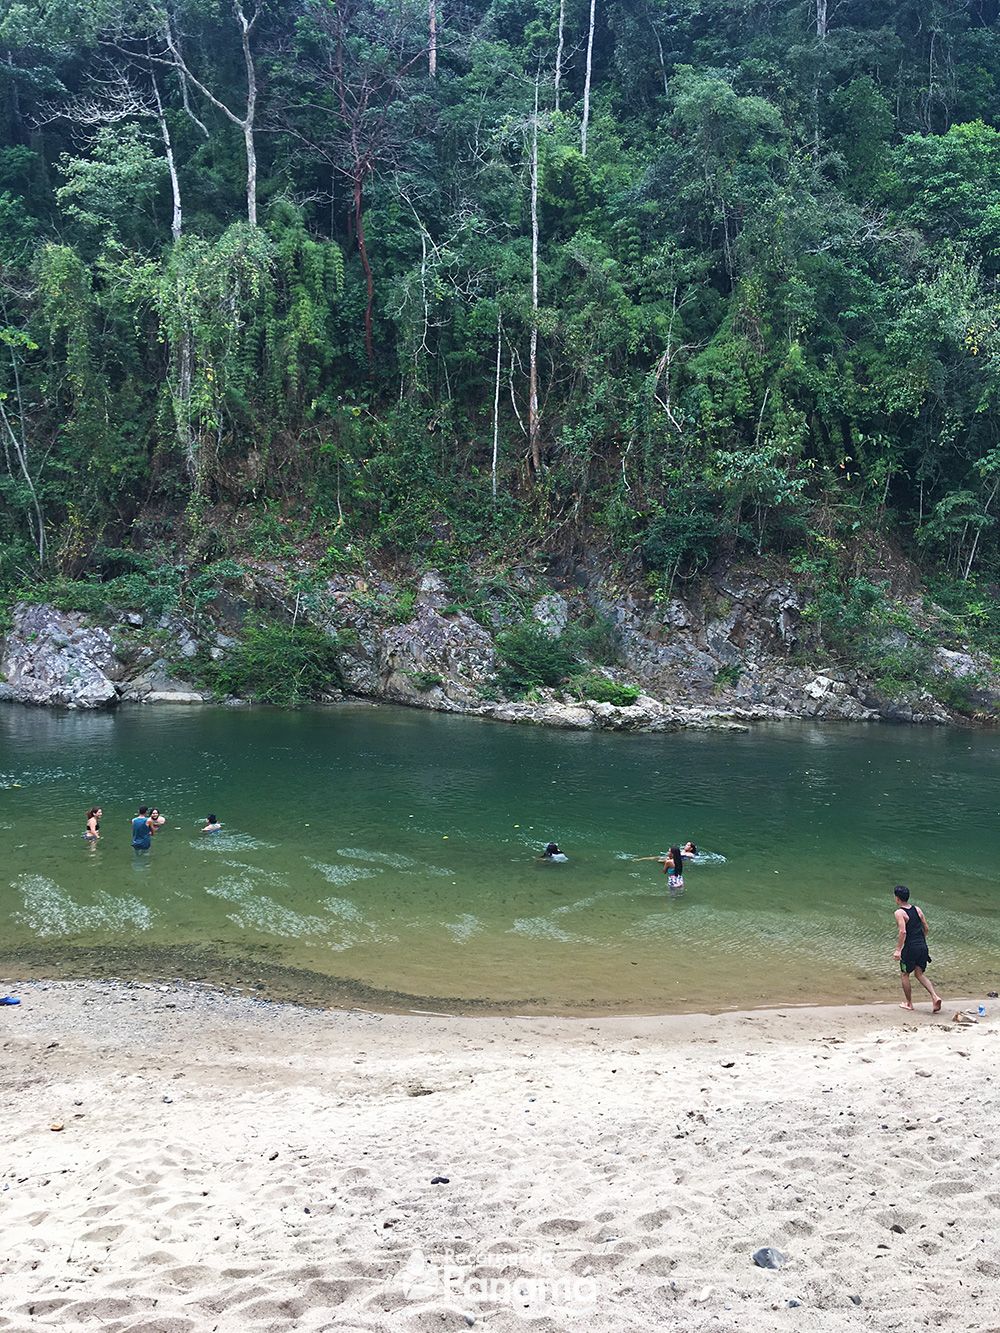 The little beach of the Chagres River